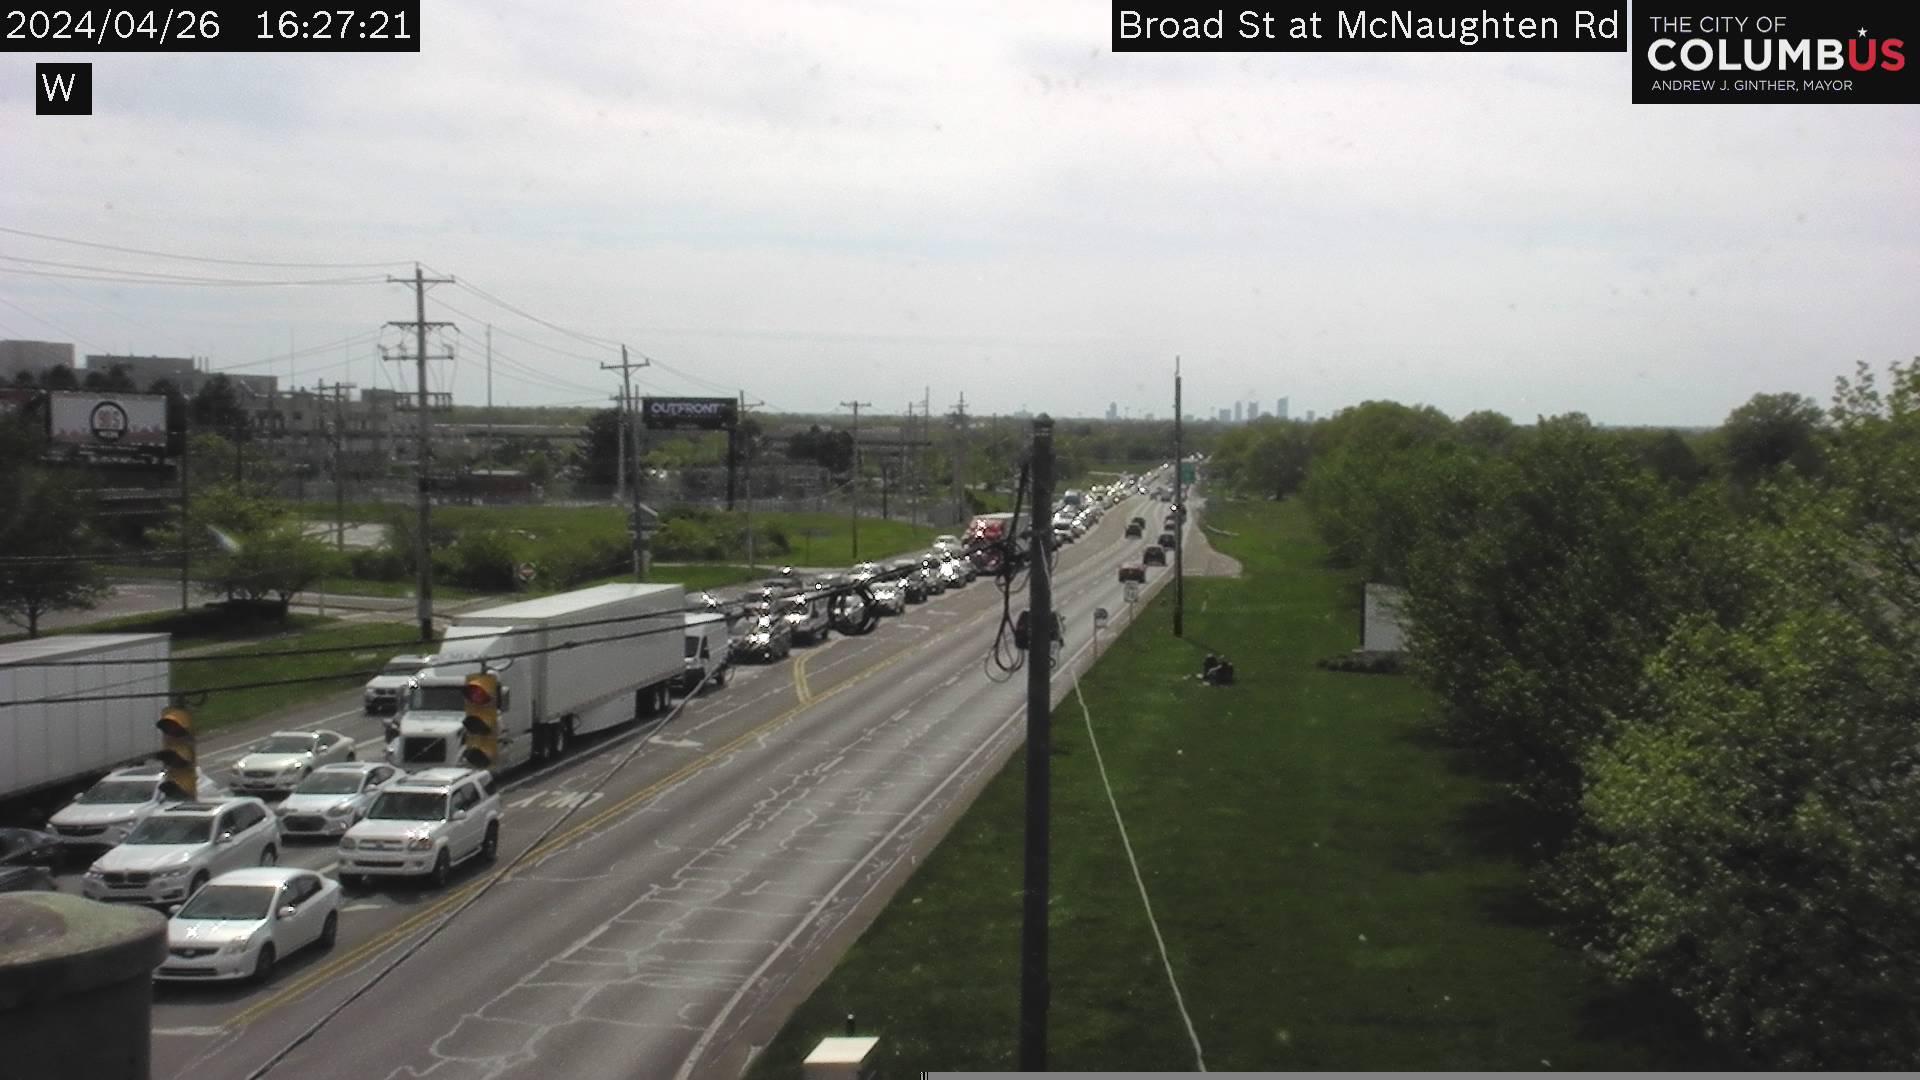 Traffic Cam Columbus: City of - Broad St at McNaughten Rd Player